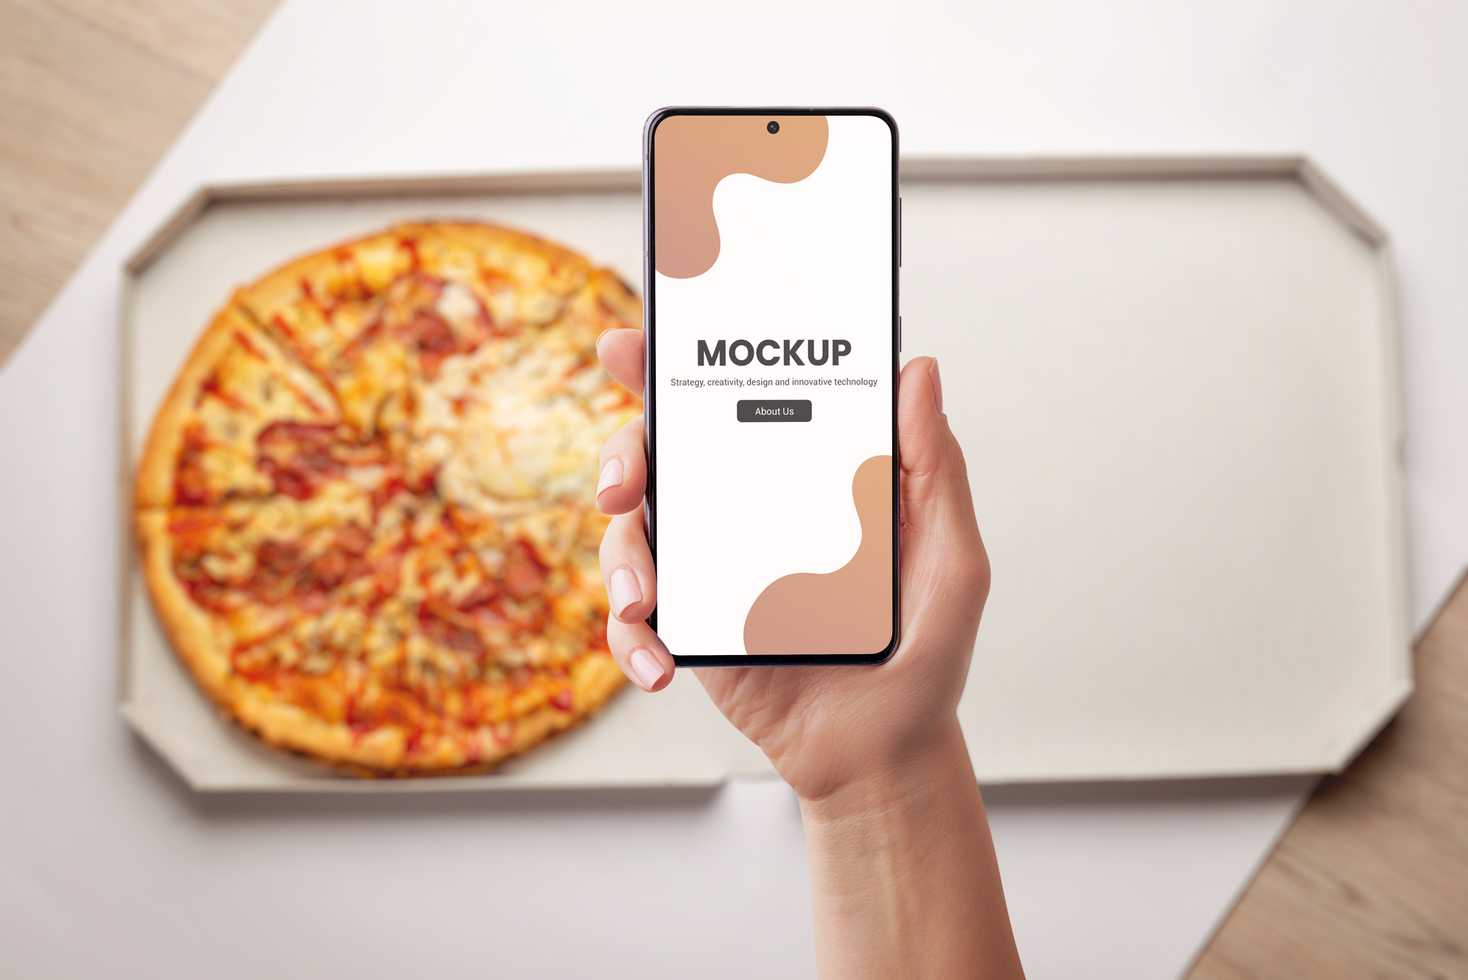 Phone mockup for food ordering with pizza in background psd